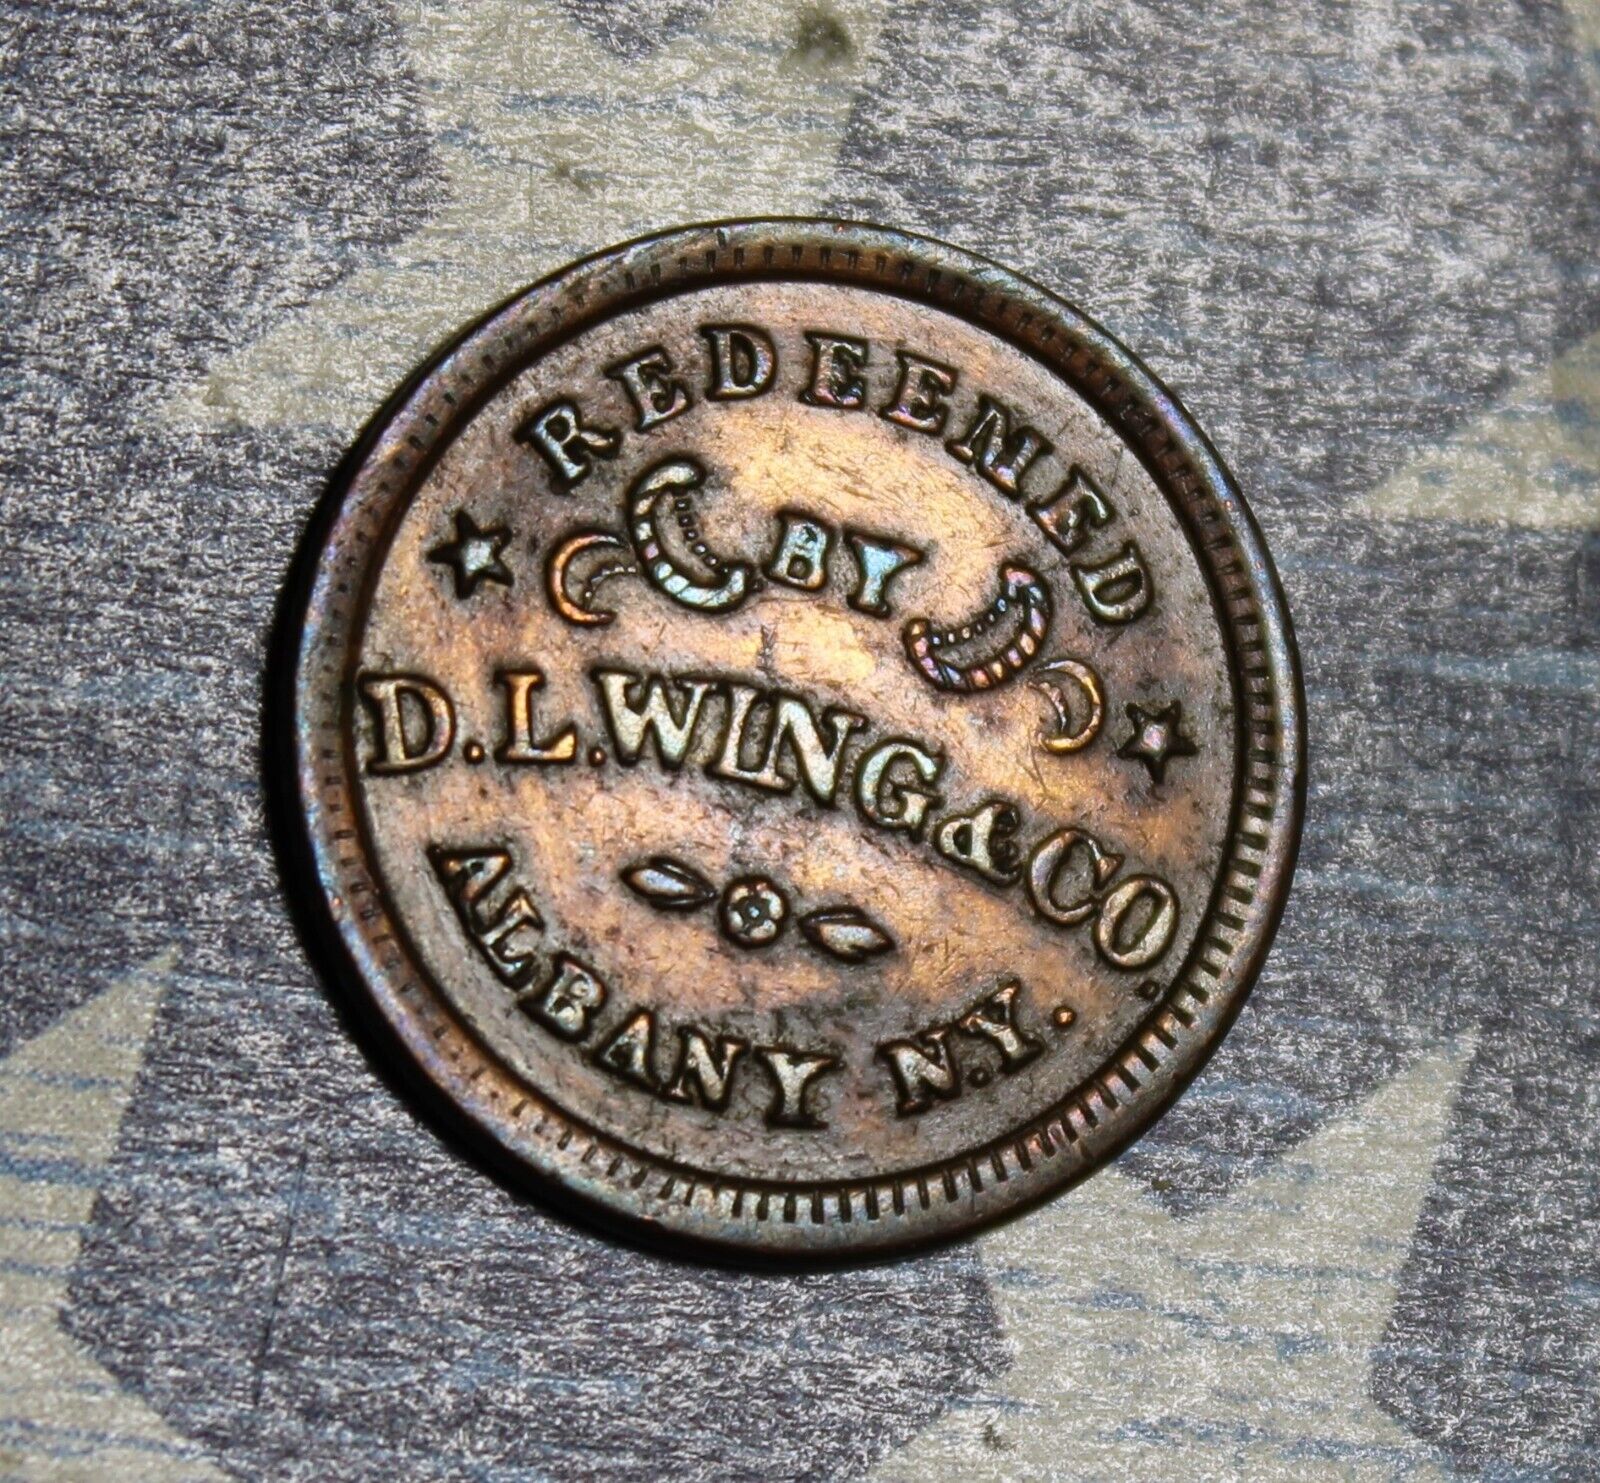 D.L. WING  & CO ALBANY, NY UNION FLOUR STORE CARD COLLECTOR TOKEN FREE SHIPPING